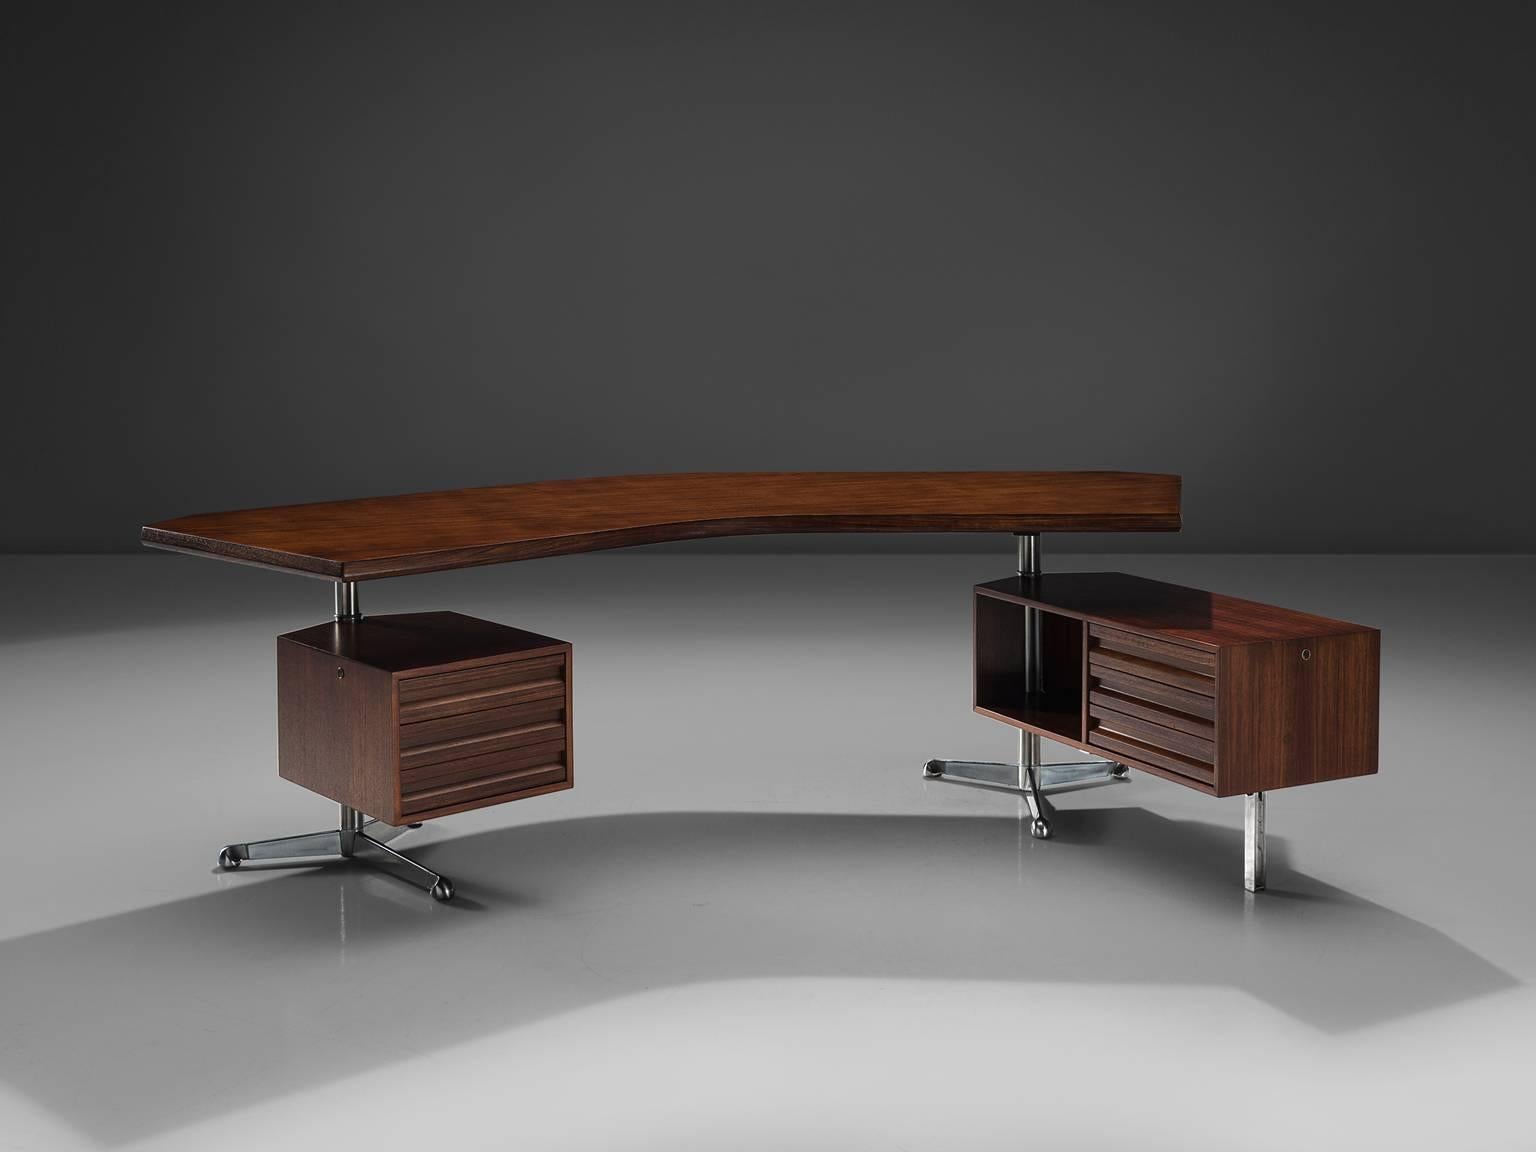 Osvaldo Borsani for Tecno, desk T-96 'Boomerang', rosewood, metal, Italy, 1956. 

This boomerang shaped desk is designed by Osvaldo Borsani. The design consists of a curved top with two revolving cabinets that are held in place by the